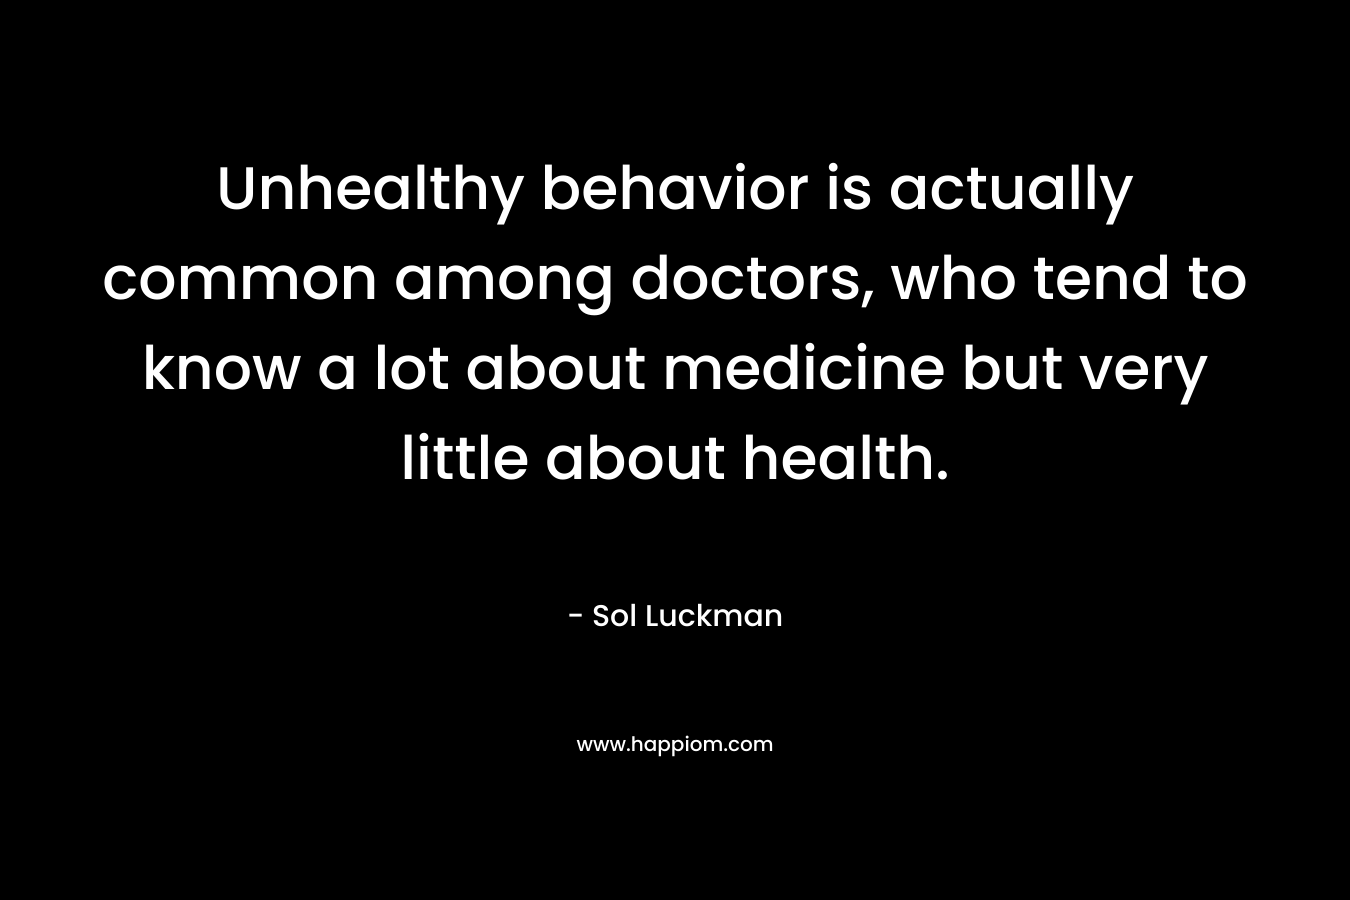 Unhealthy behavior is actually common among doctors, who tend to know a lot about medicine but very little about health. – Sol Luckman